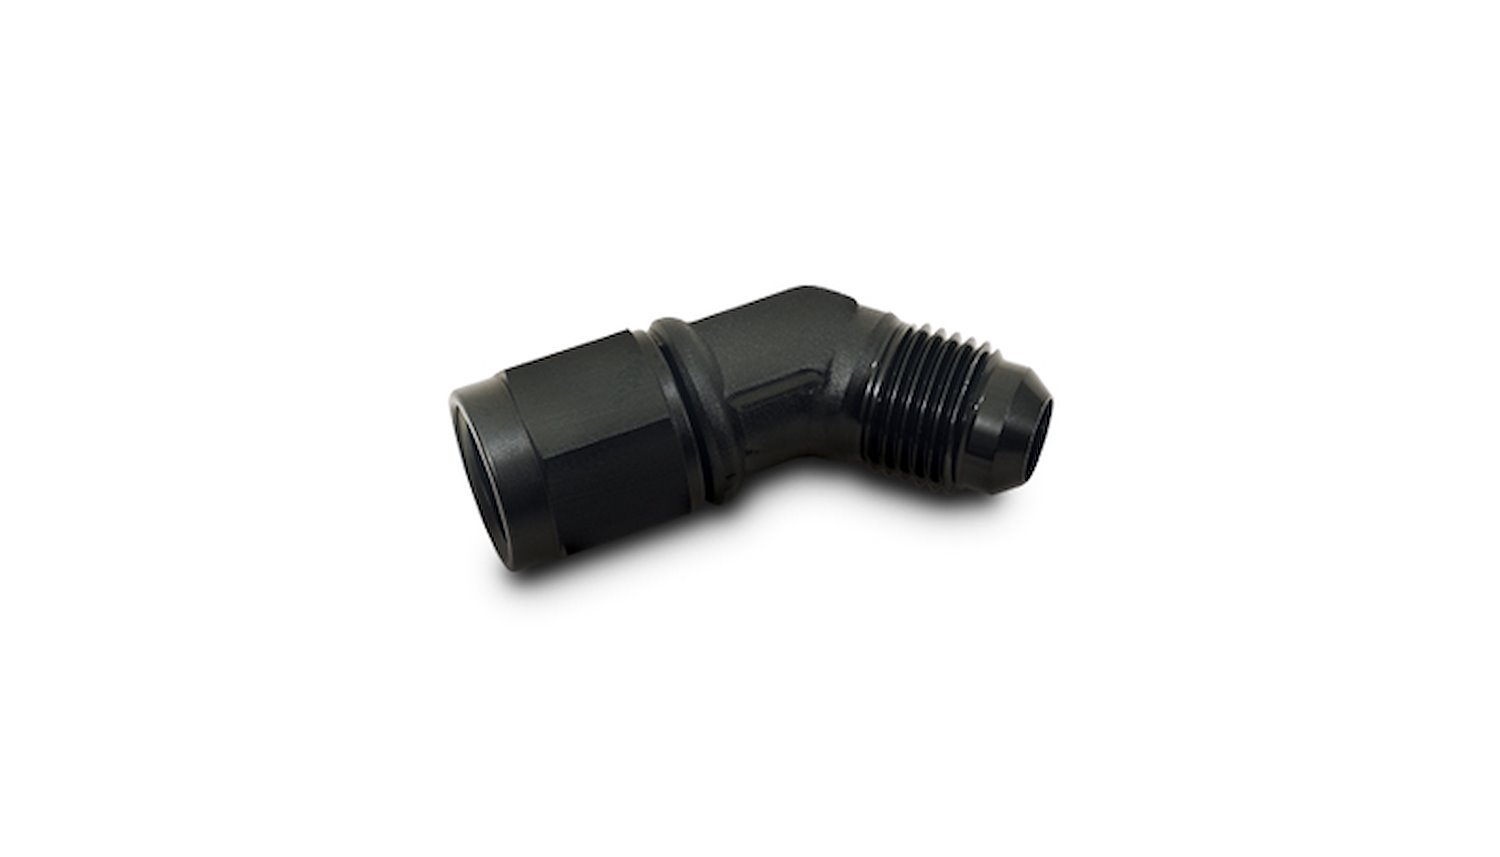 Female to Male Swivel Adapter -10AN X -10AN